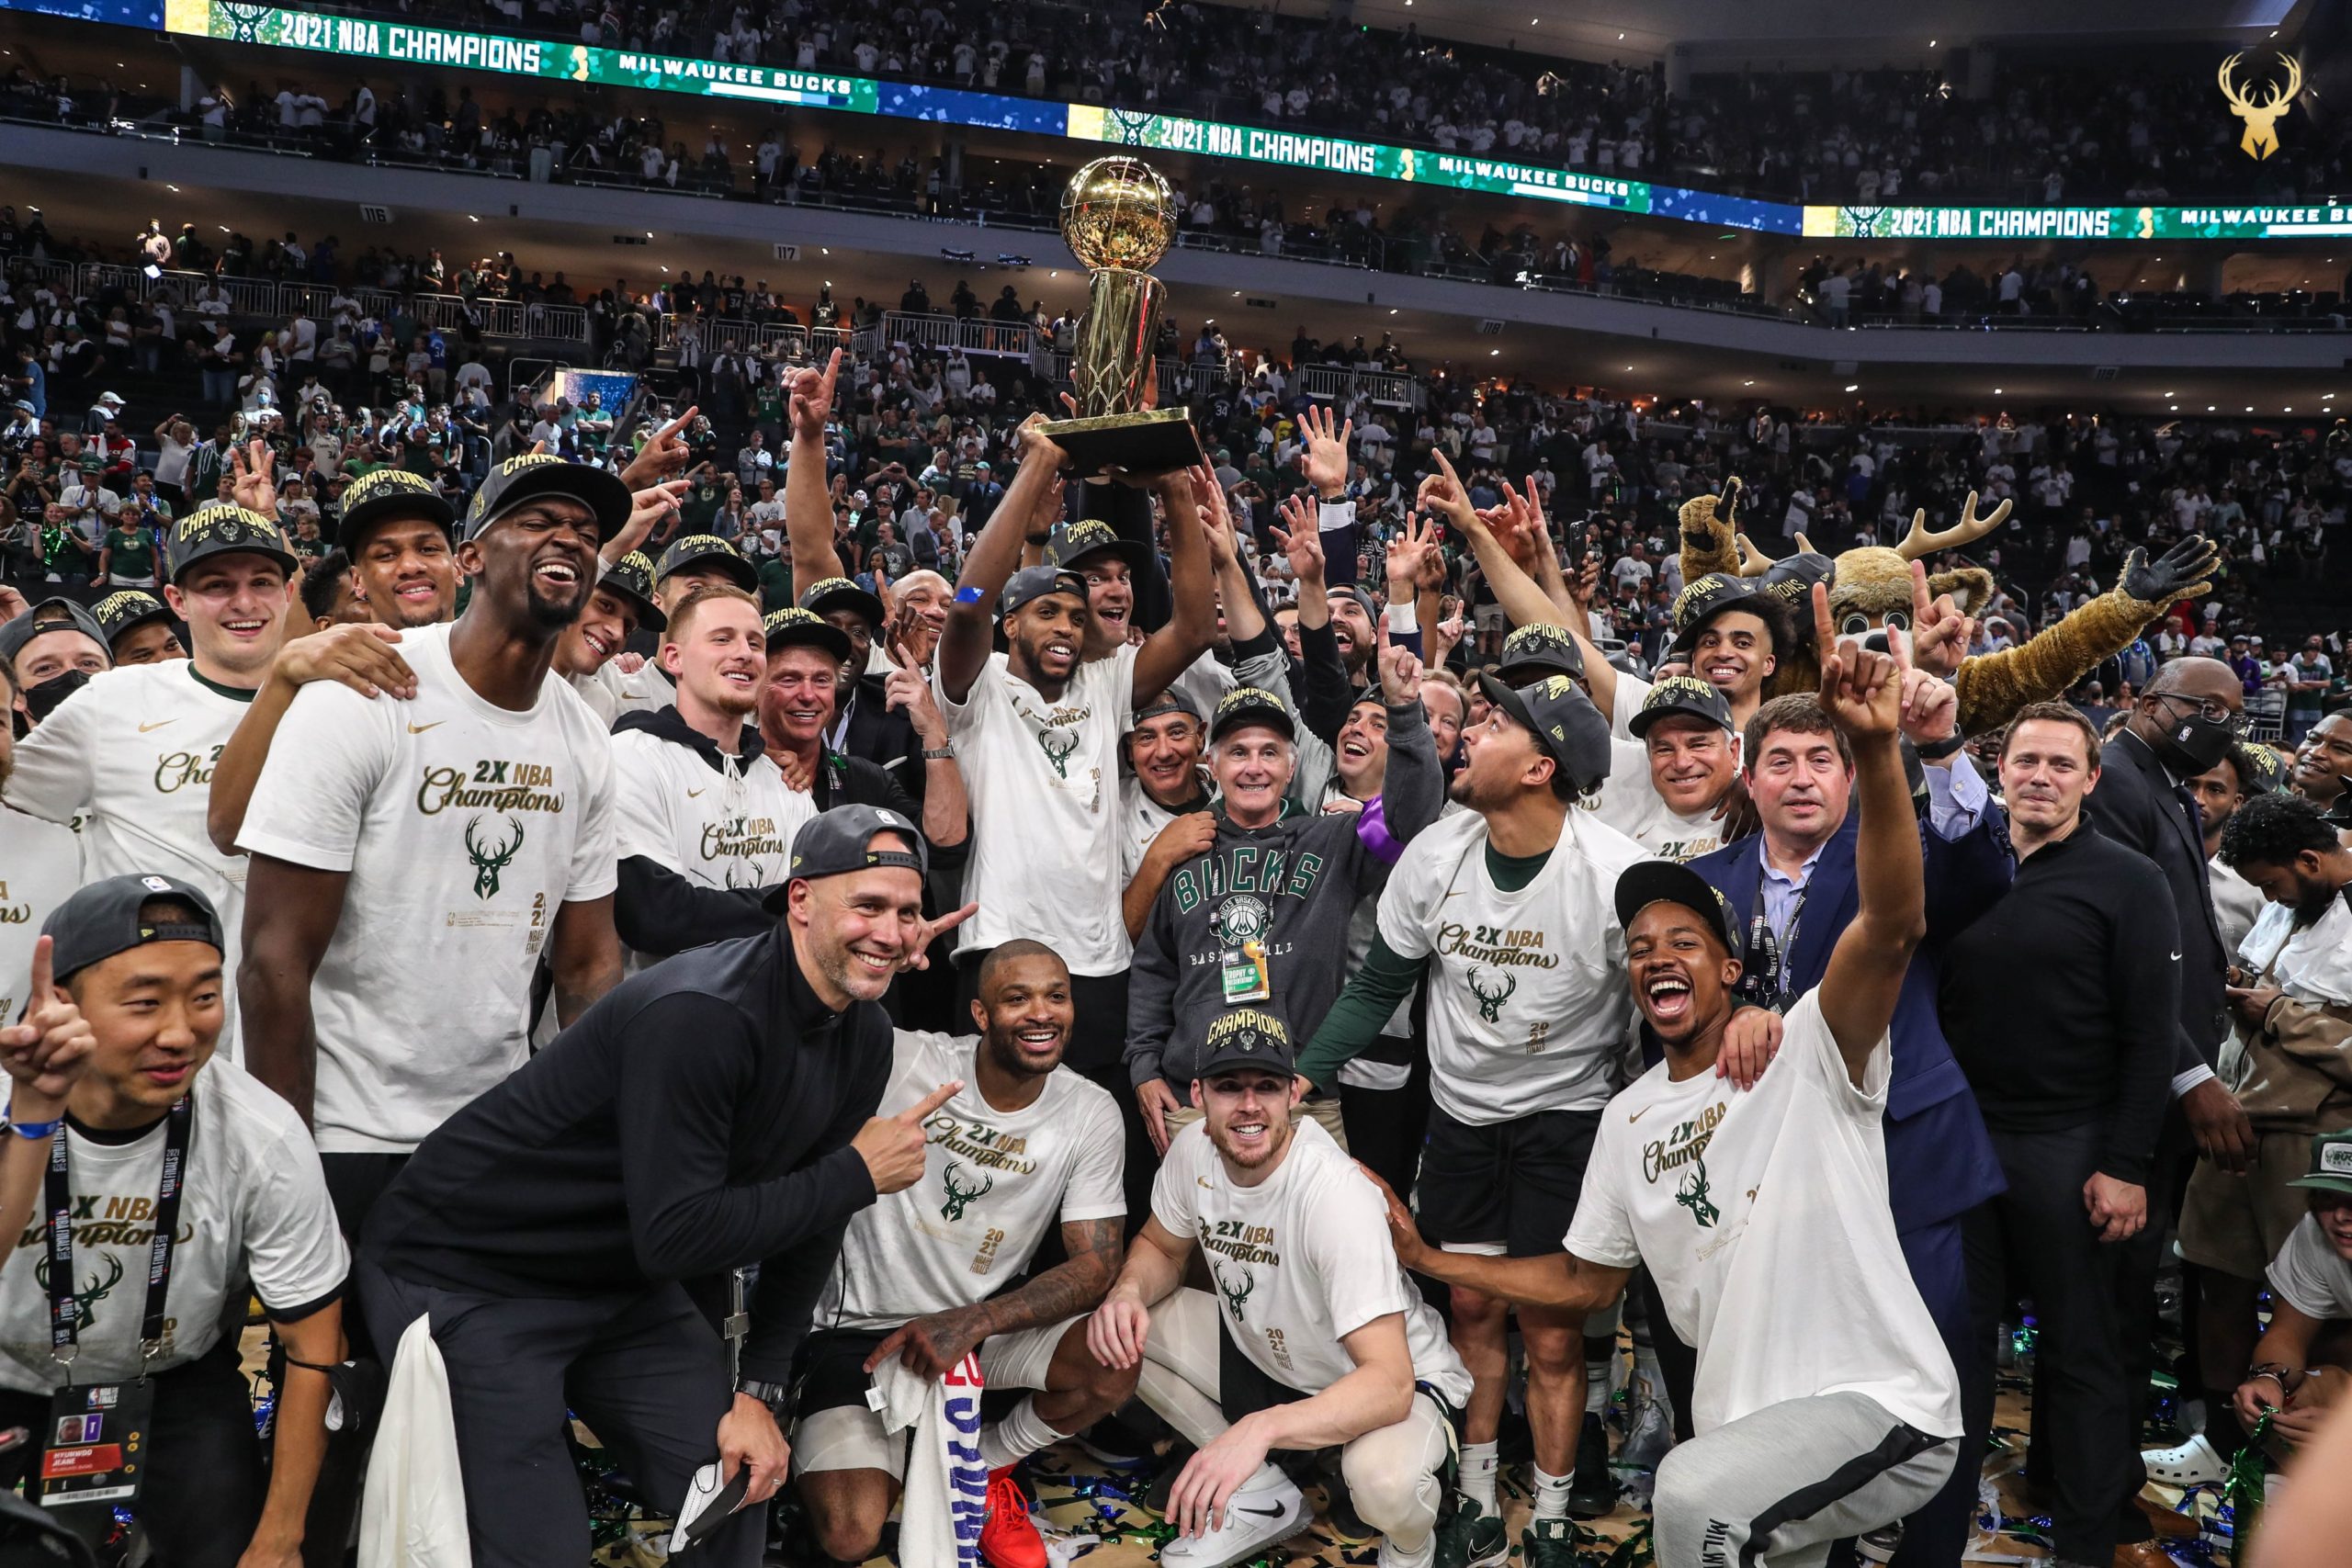 The Bucks win their first NBA championship in 50 years.